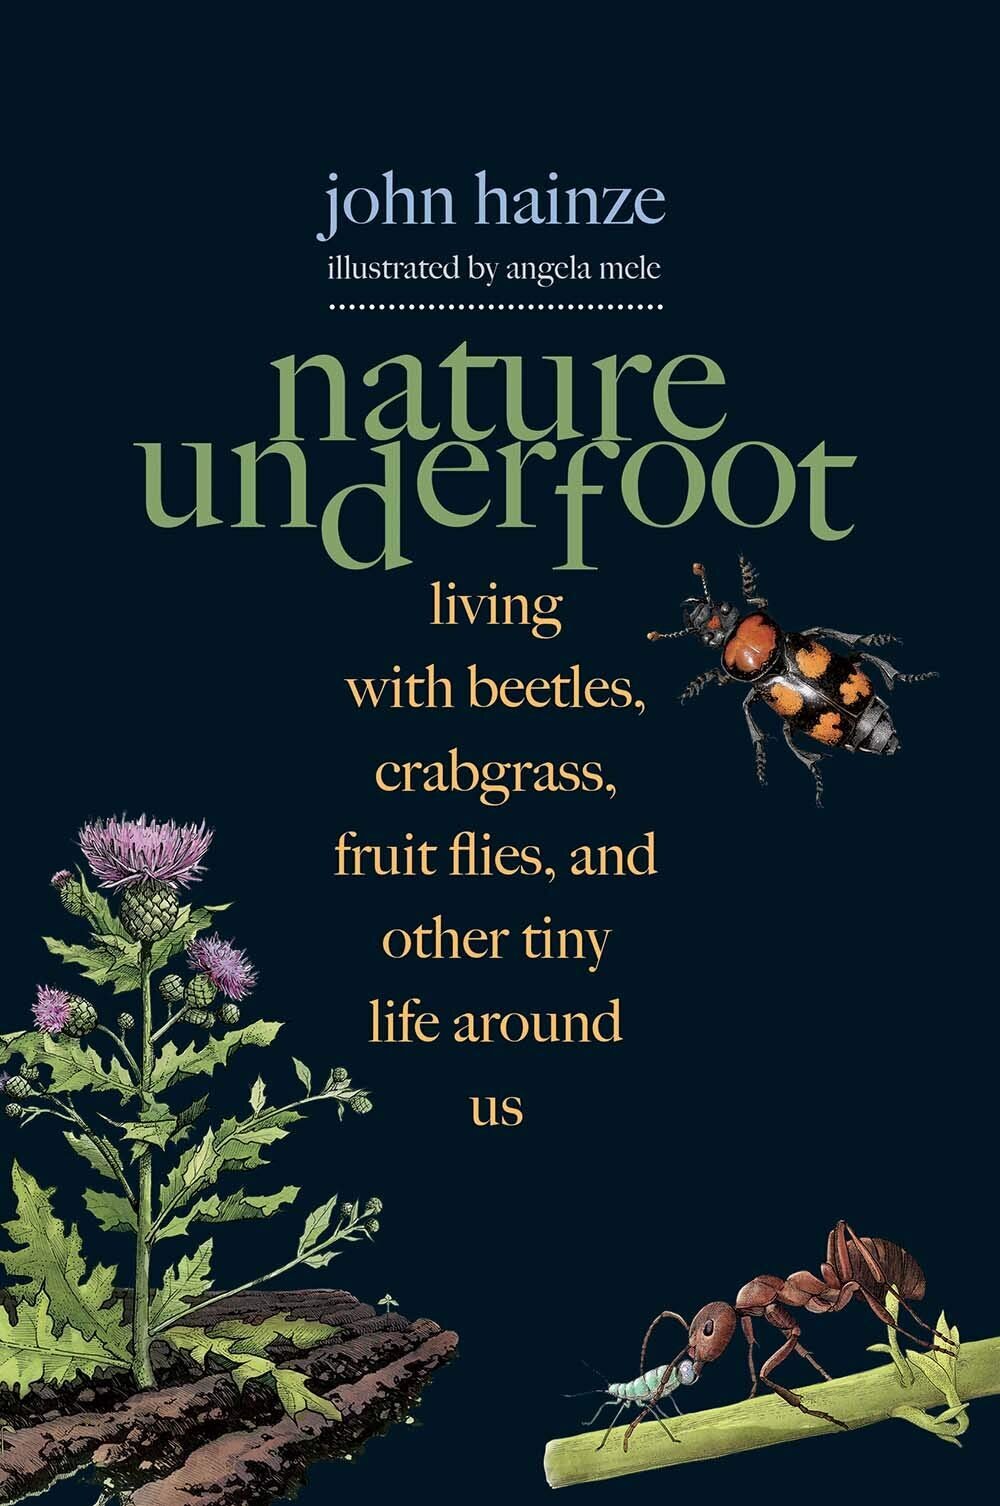 Best of Nature Nature Underfoot Living with Beetles, Crabgrass, Fruit Flies, and Other Tiny Life Around Us by John Hainze Illustrated by Angela Mele.jpg